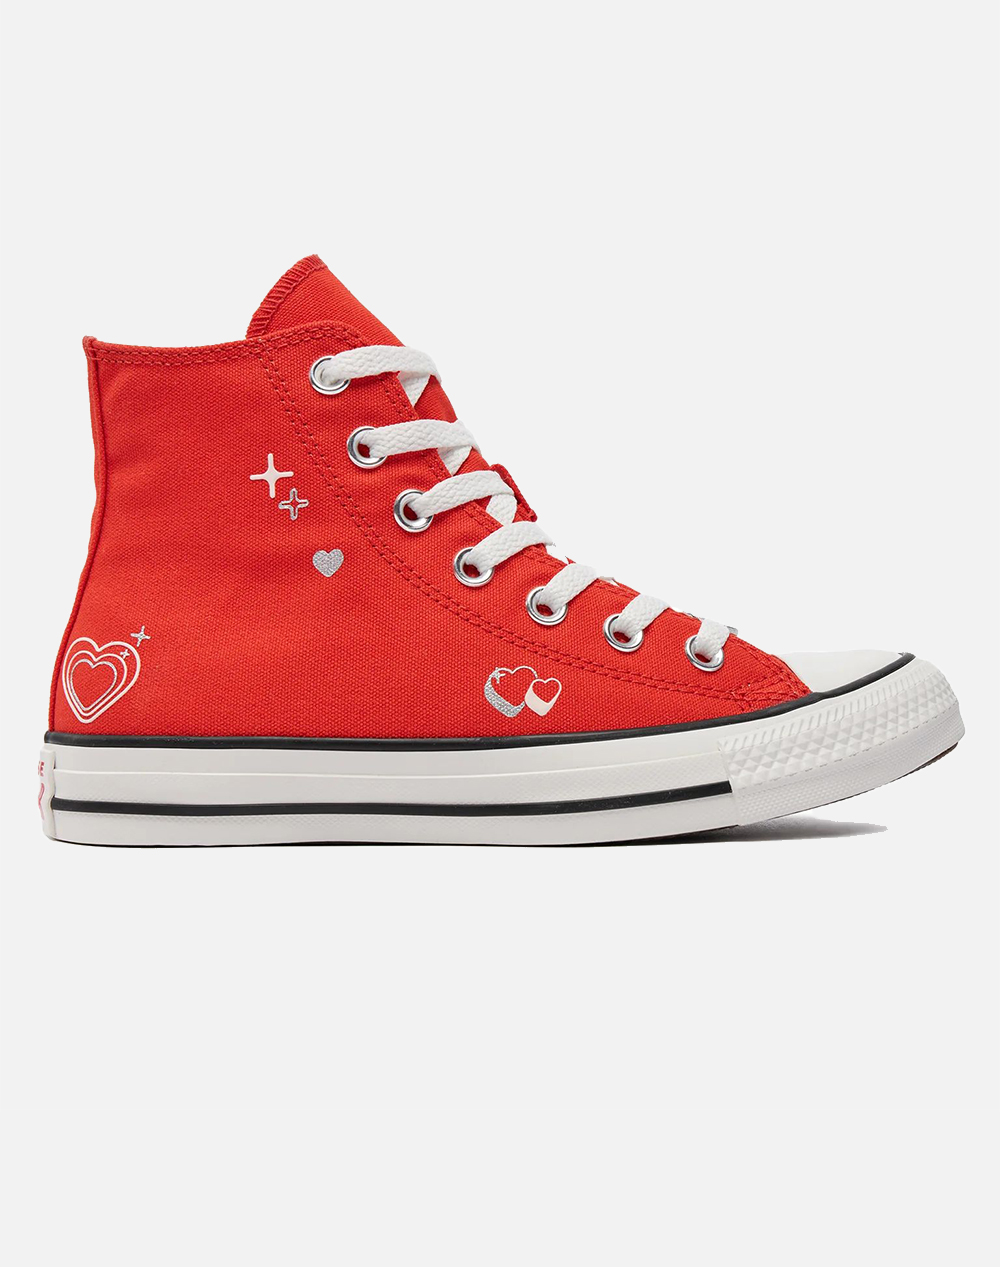 CONVERSE CHUCK TAYLOR ALL STAR A09117C-671 Red